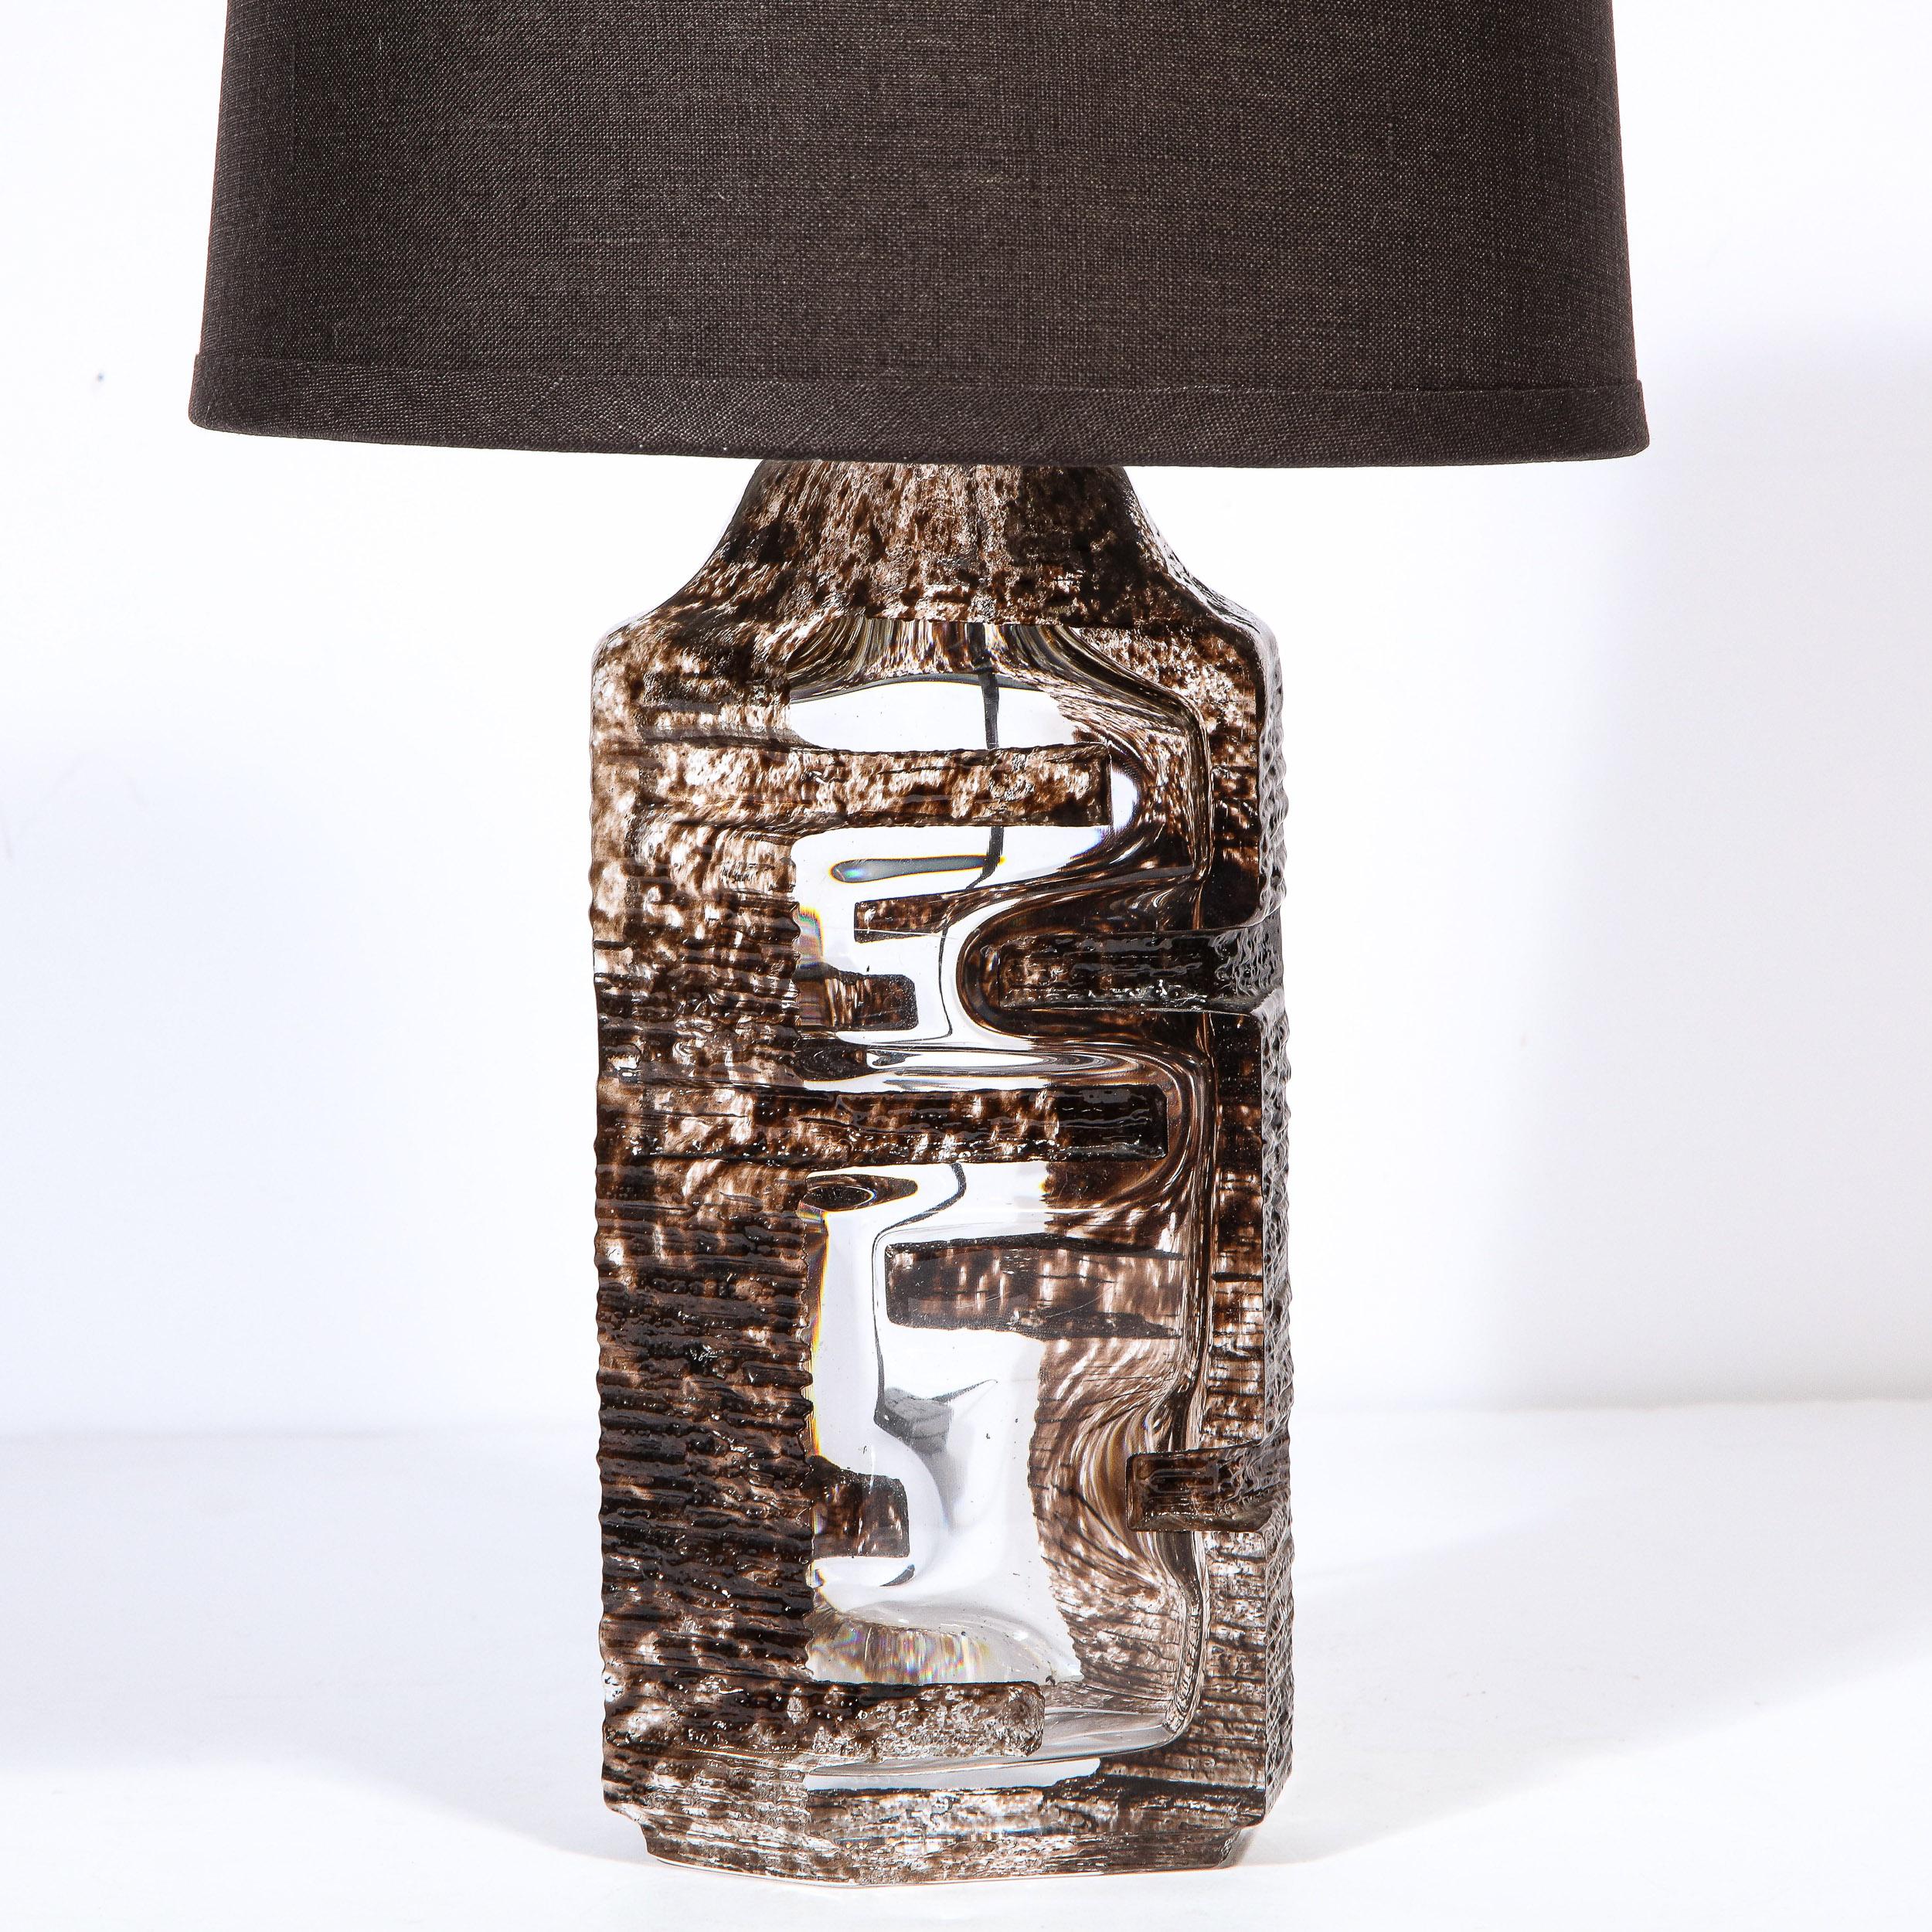 French Mid-Century Modern Brutalist Handblown Glass Table Lamp Signed Daum For Sale